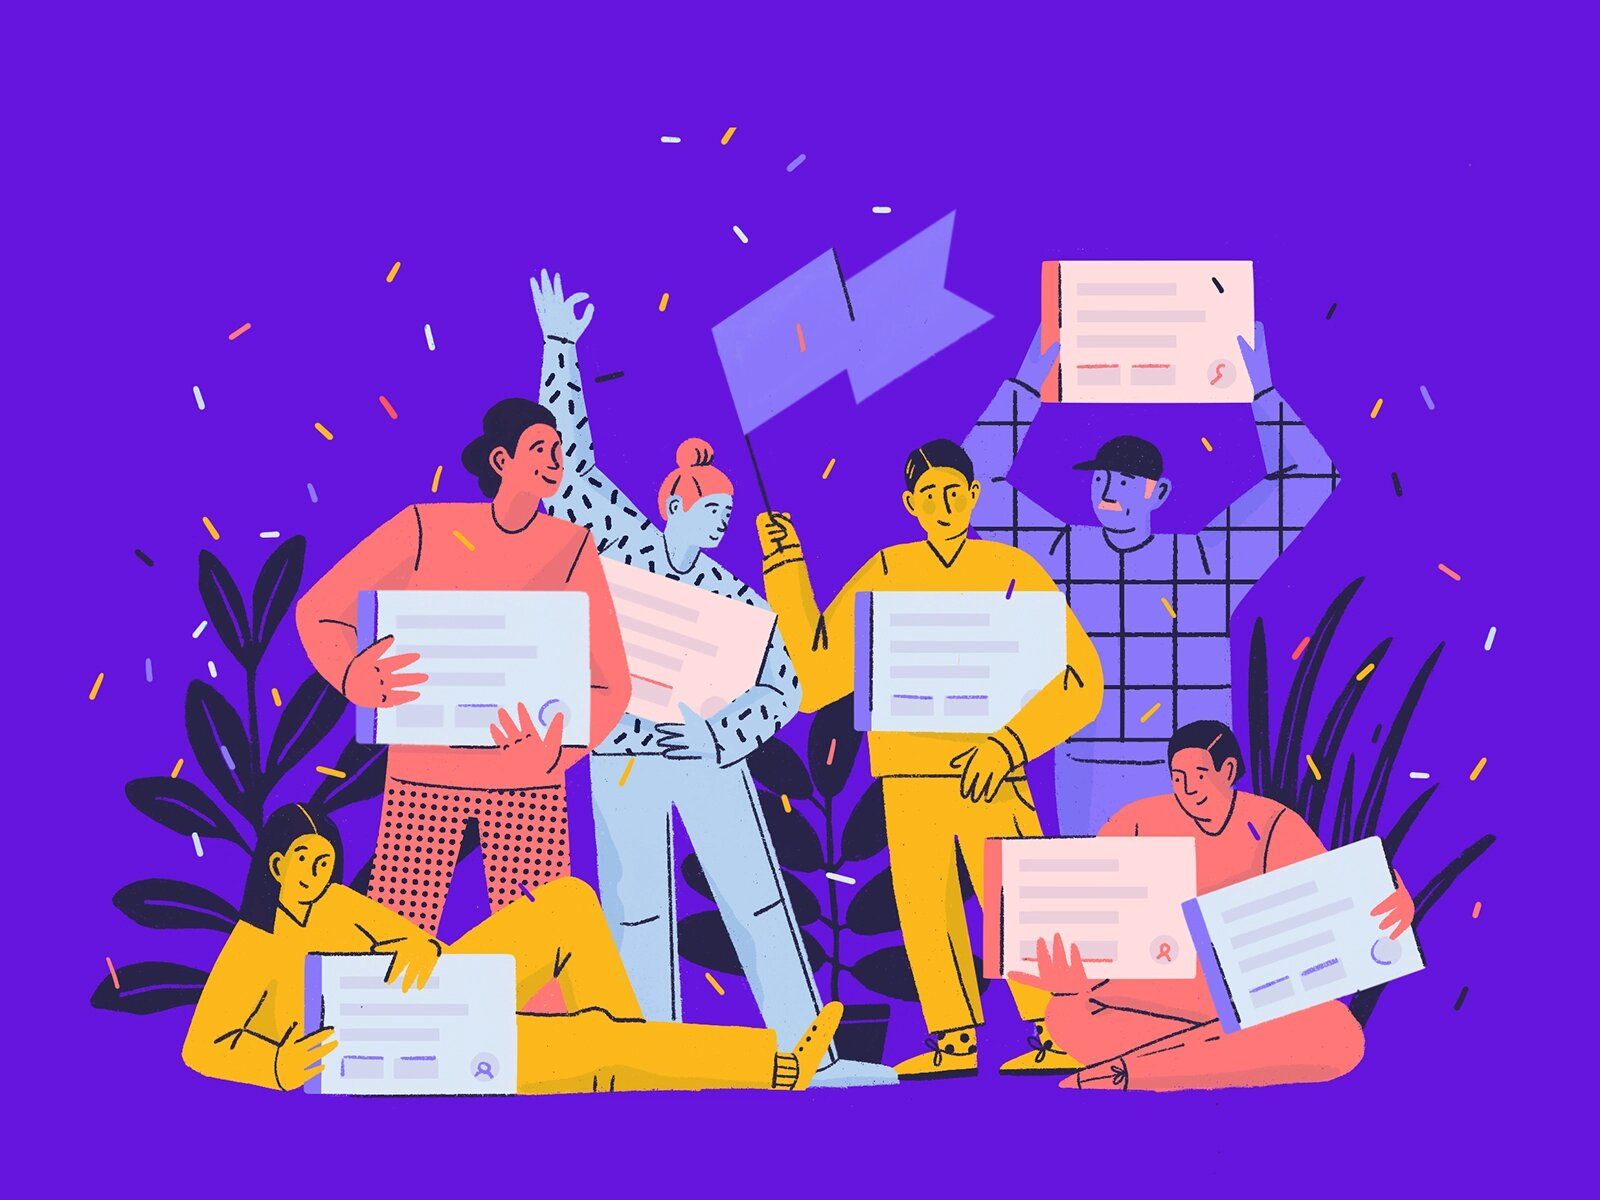 Agile methodology in software development includes structuring a team in way that it’s not too big (an agile team normally includes up to 10 members) (*image by [Kasia Bojanowska](https://dribbble.com/kabojanowska){ rel="nofollow" target="_blank" .default-md}*)